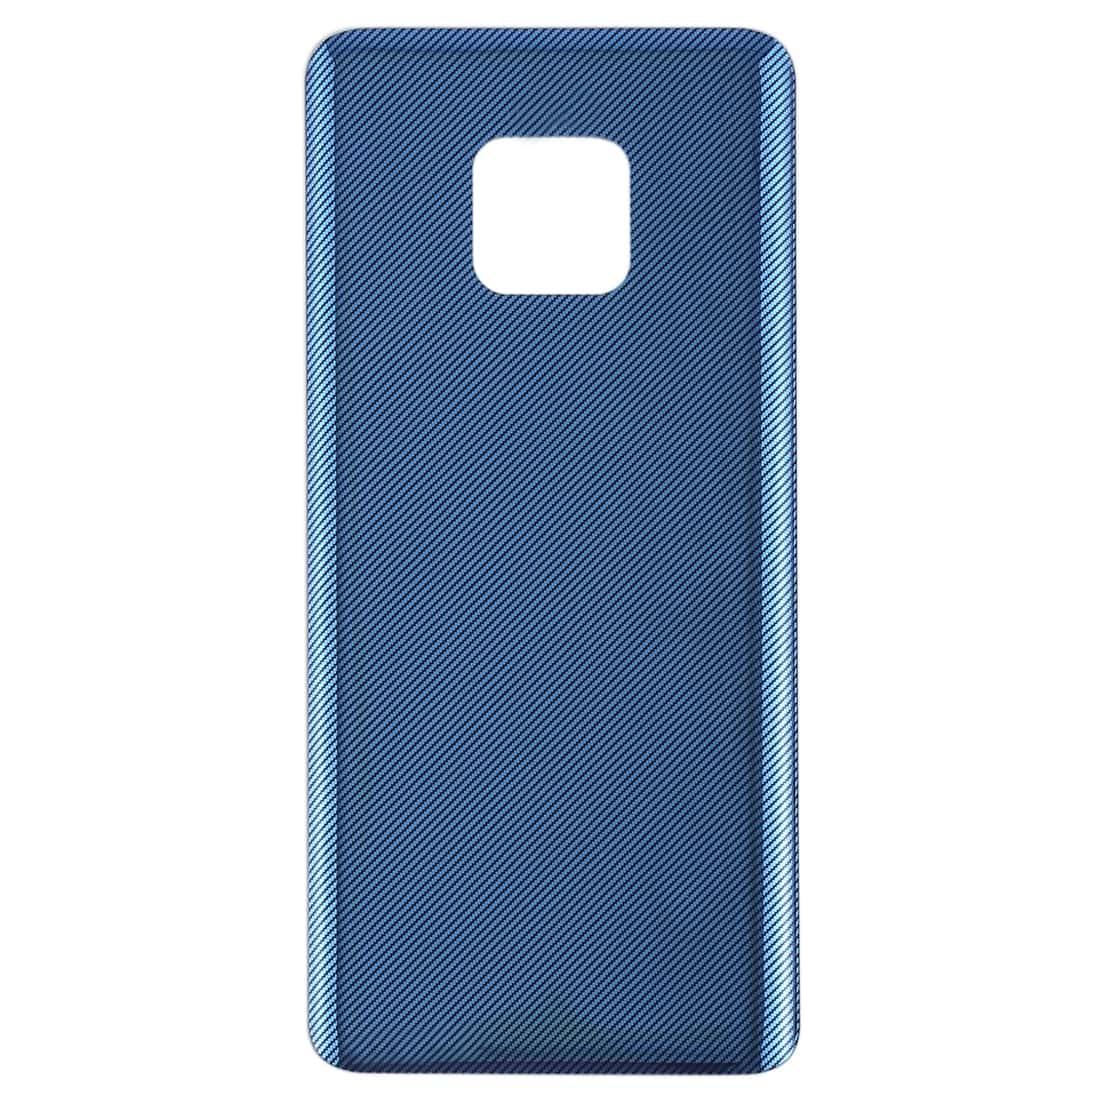 Back Glass Panel for  Huawei Mate 20 Pro Blue